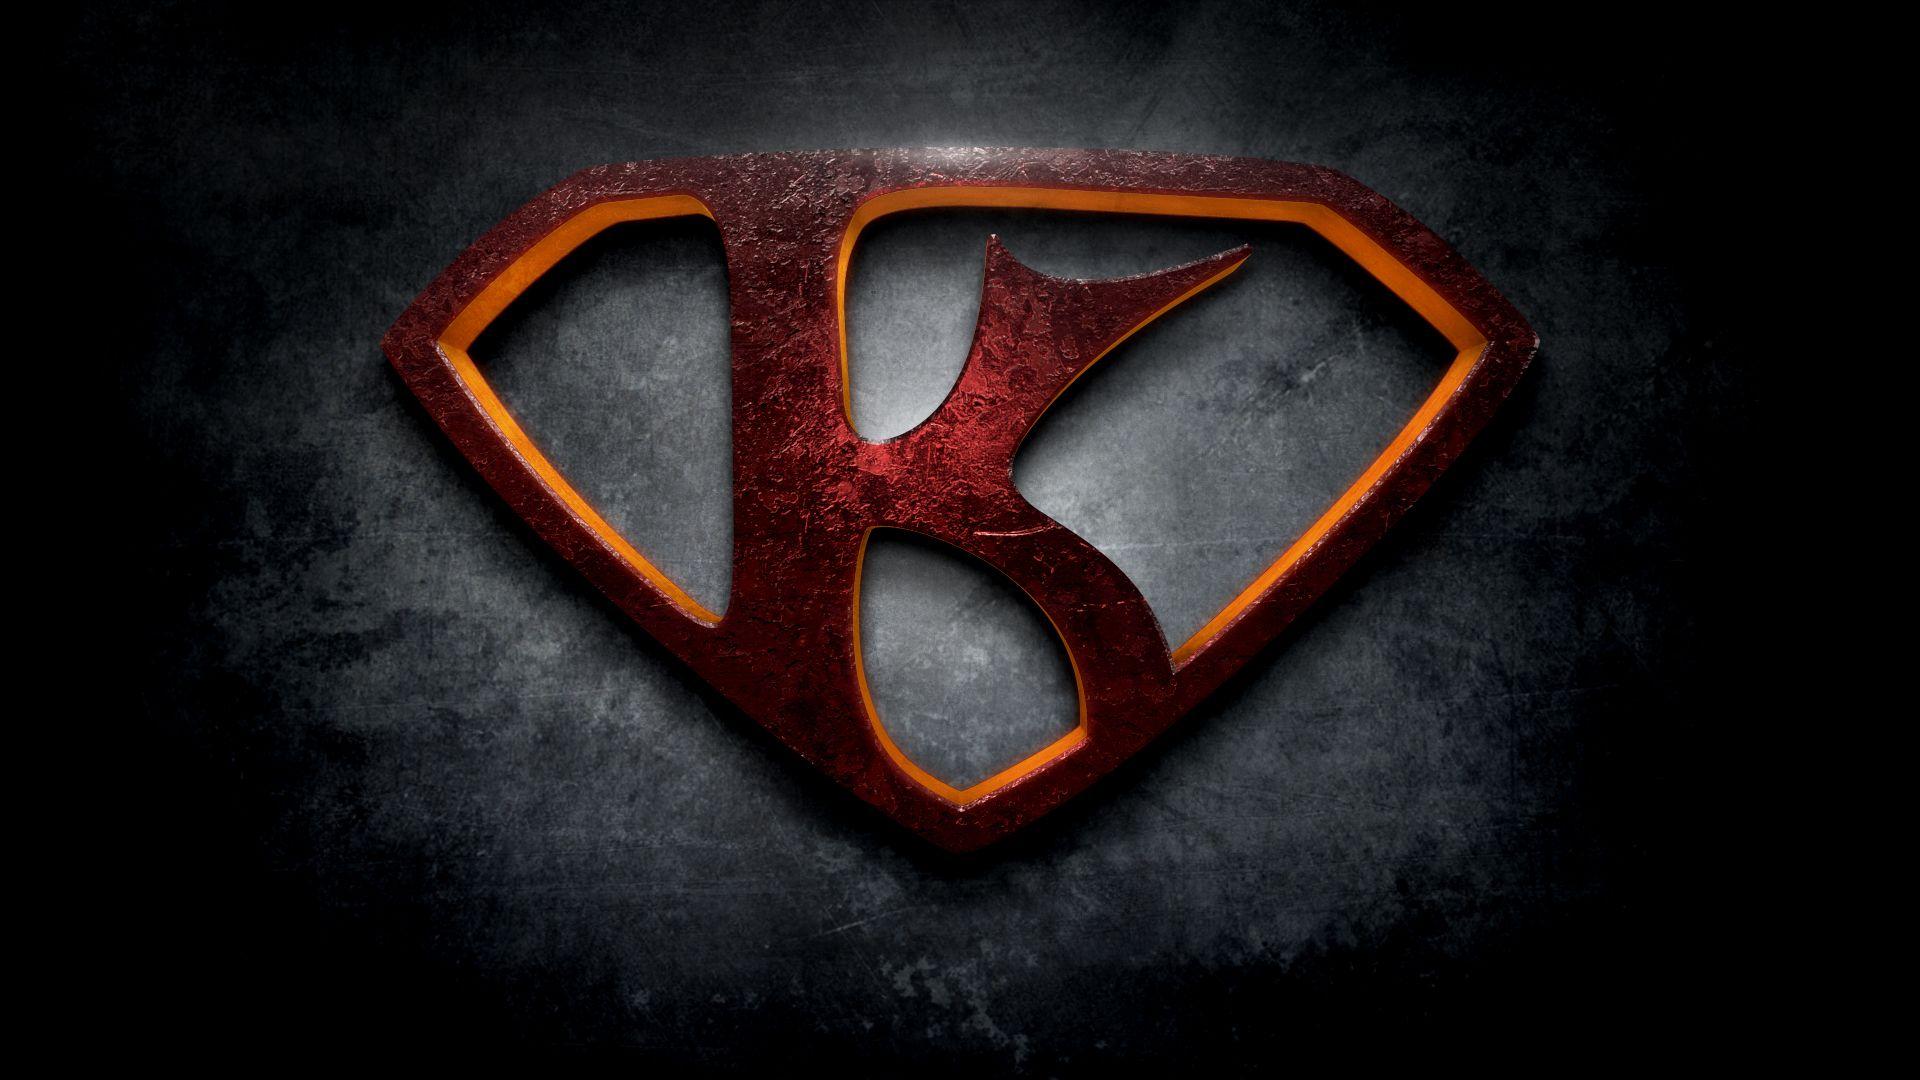 Super K Logo - super k - #122565768 added by burdenedsoul at why didnt i think of this?